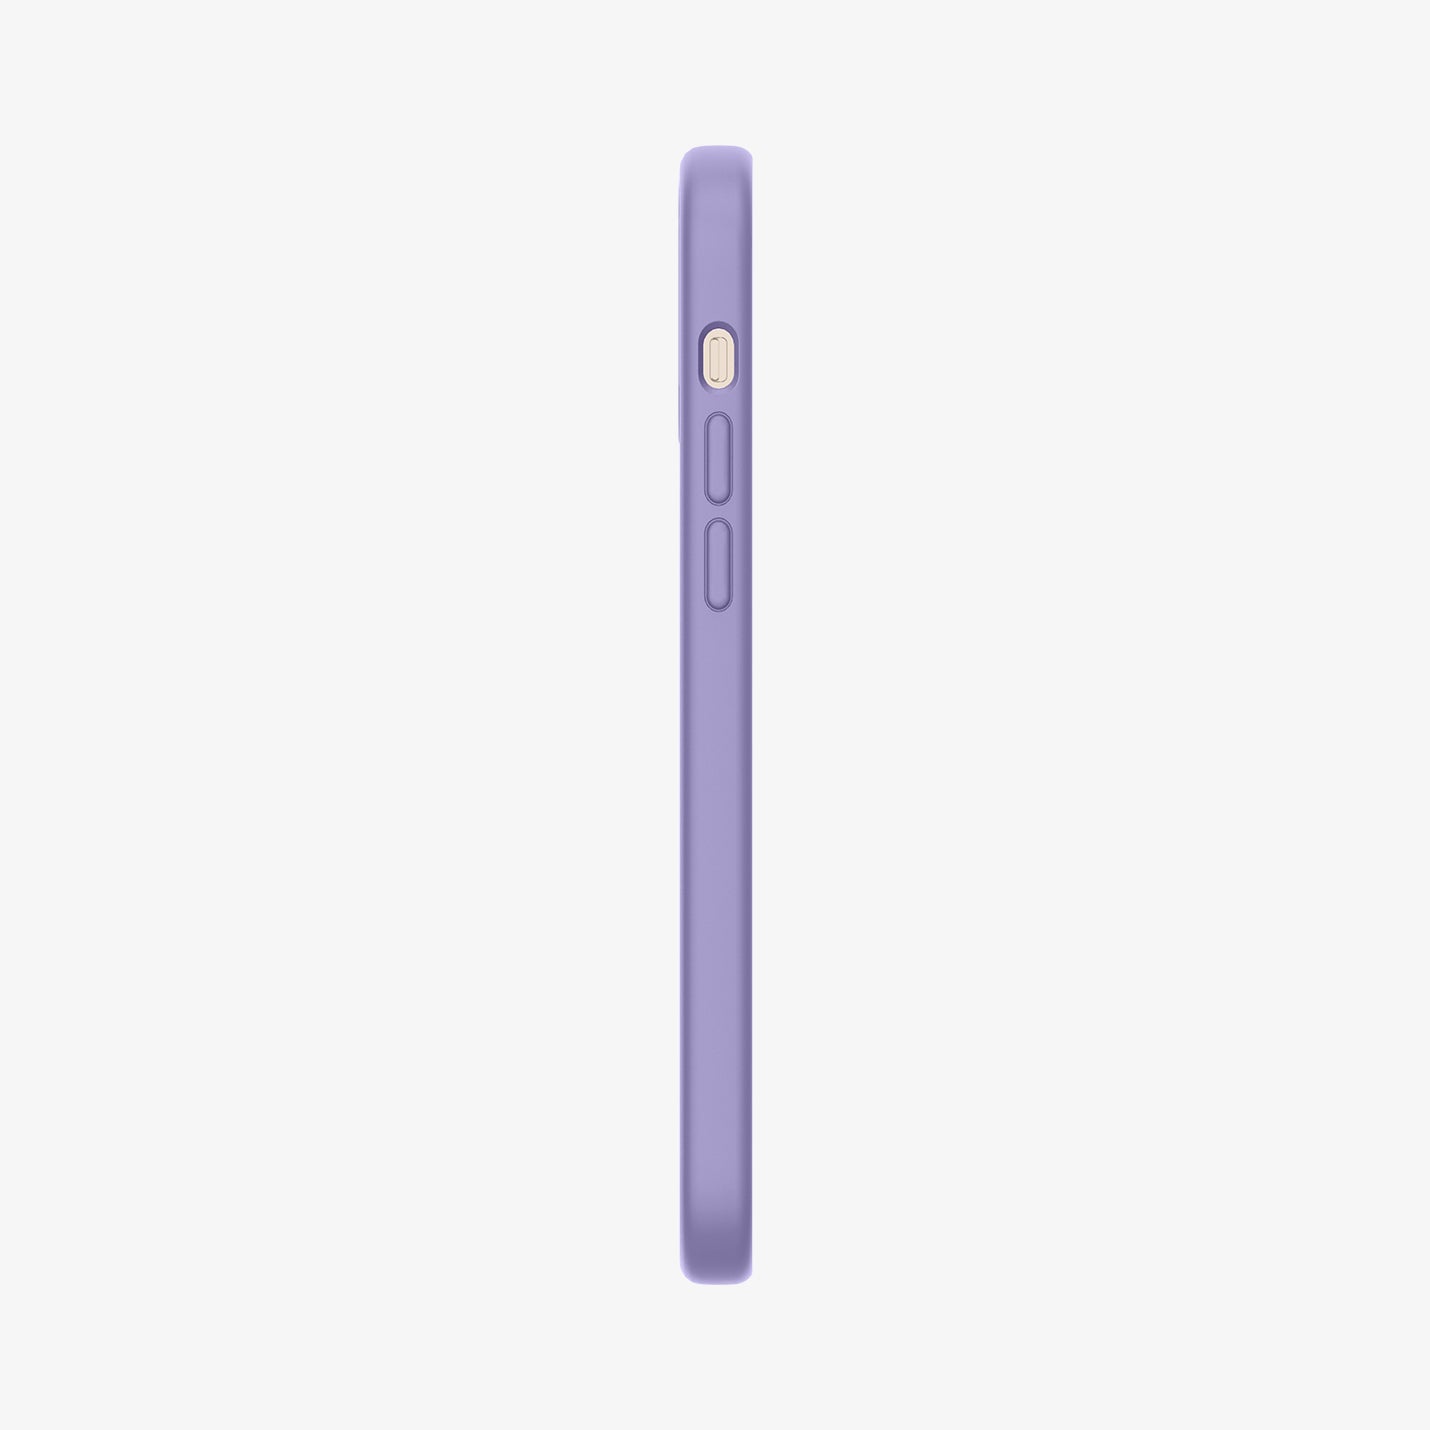 ACS03114 - iPhone 12 / 12 Pro Case Silicone Fit in iris purple showing the side with volume controls